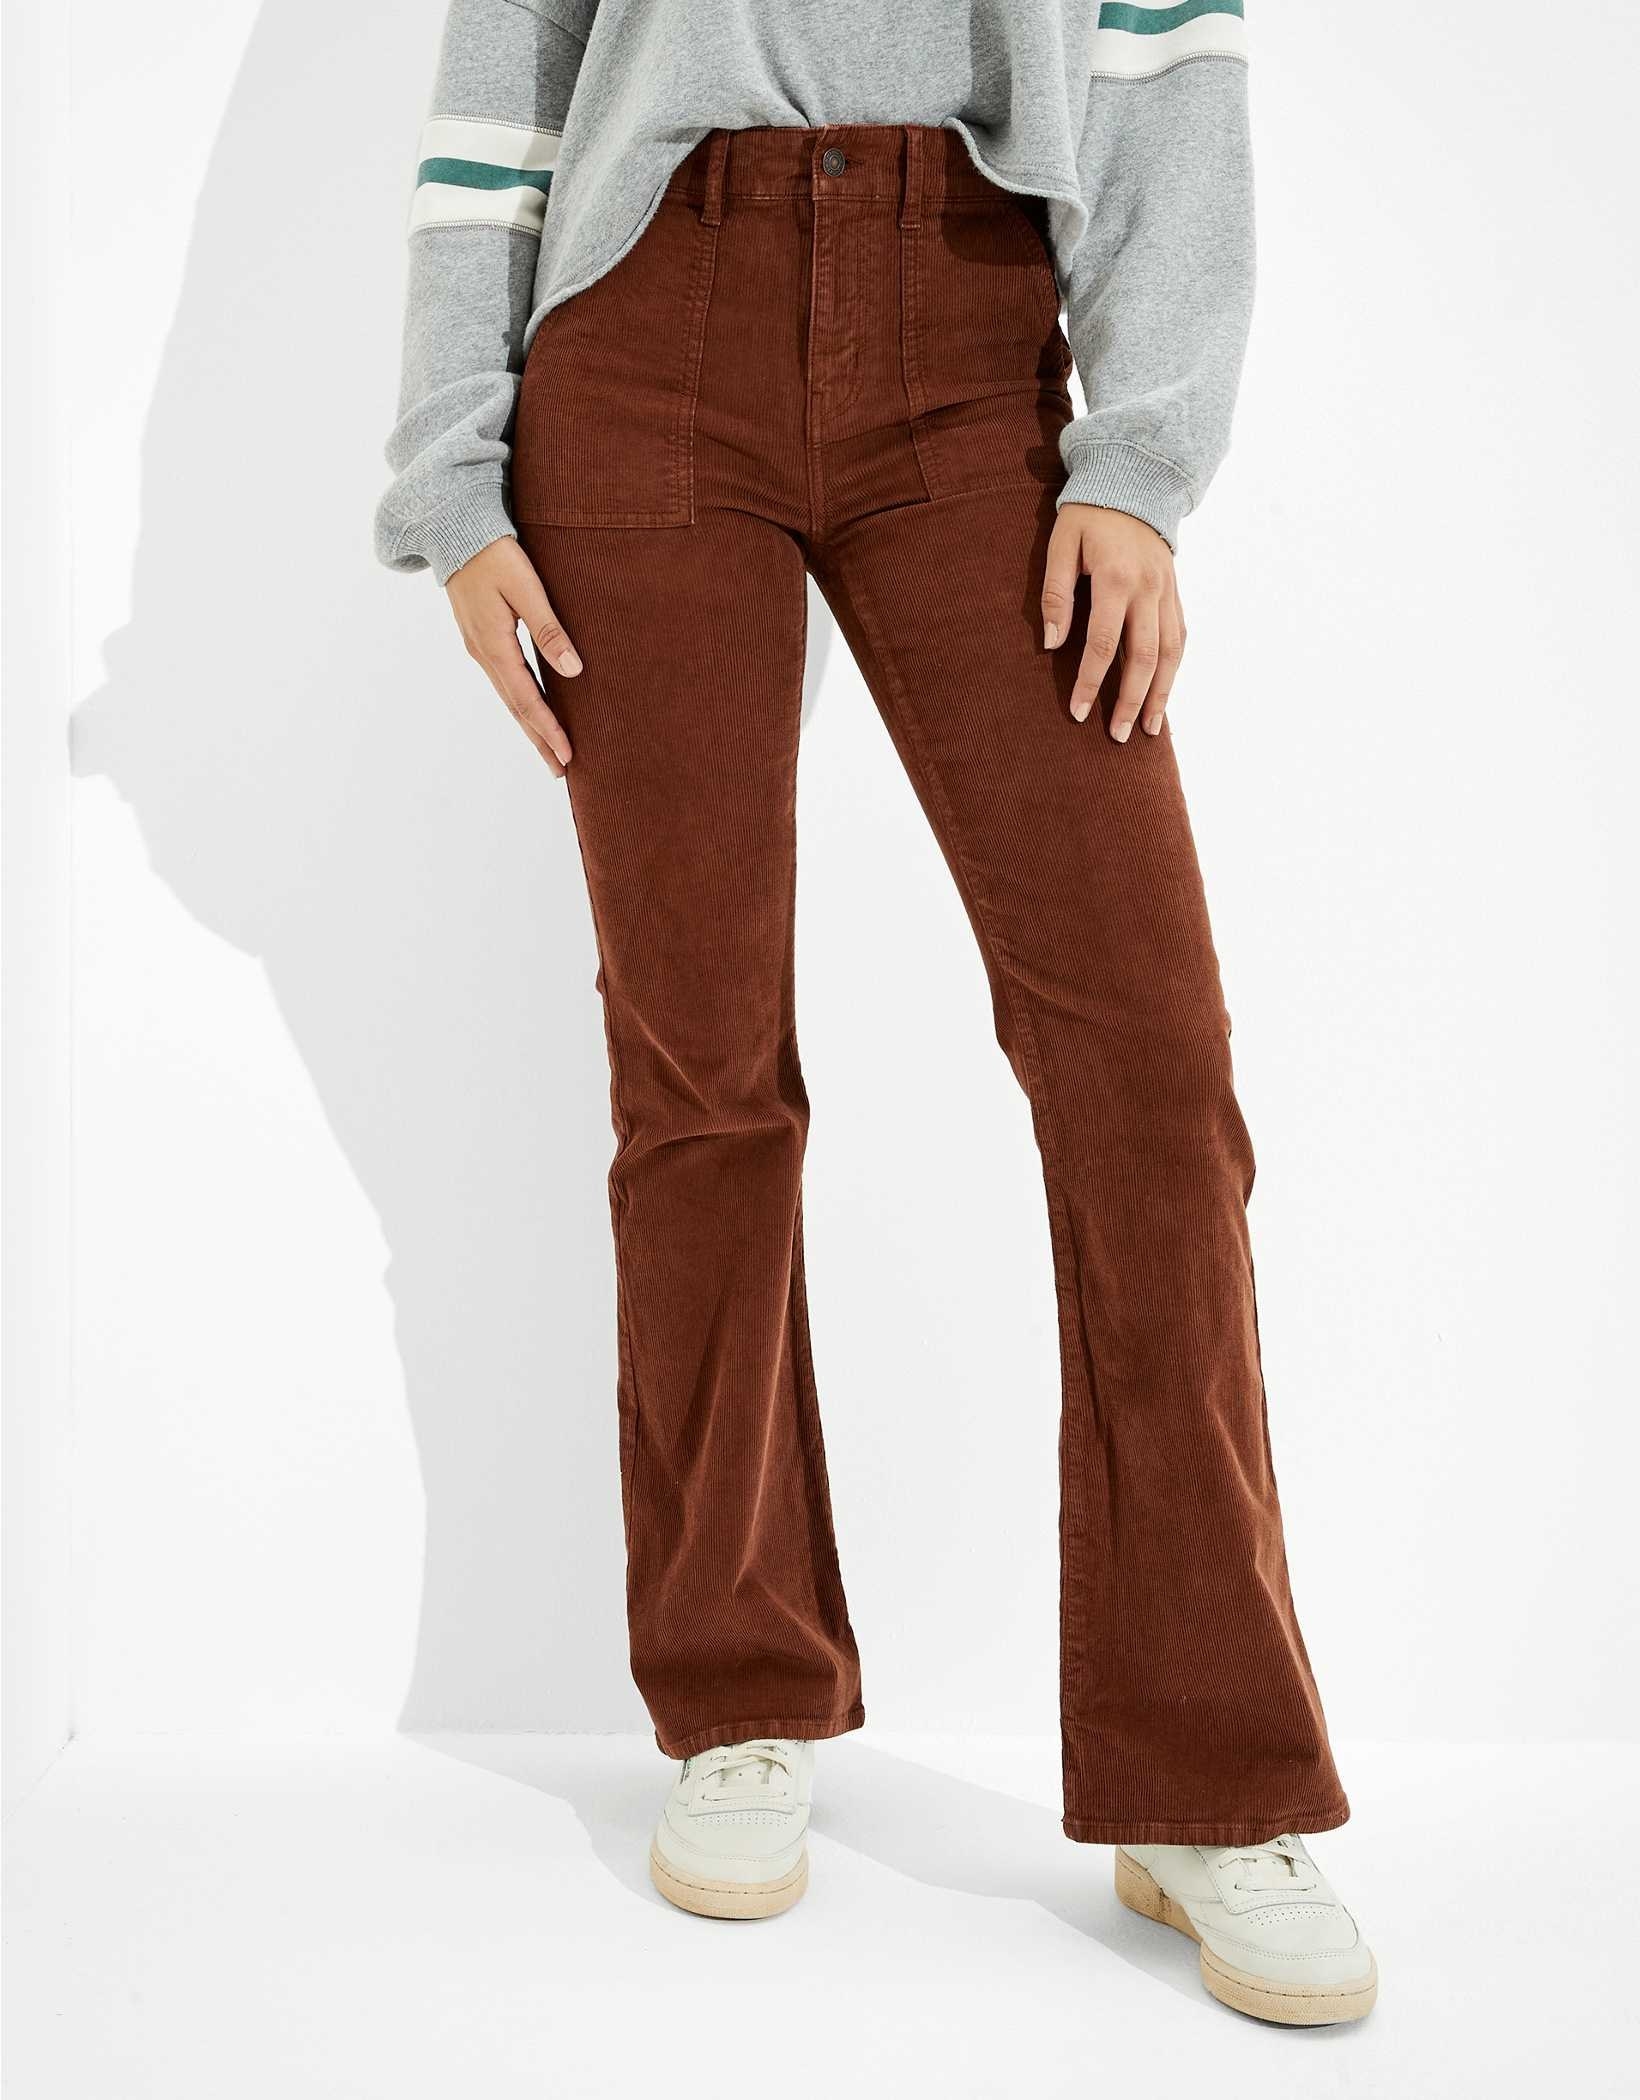 model wearing the brown cord pants